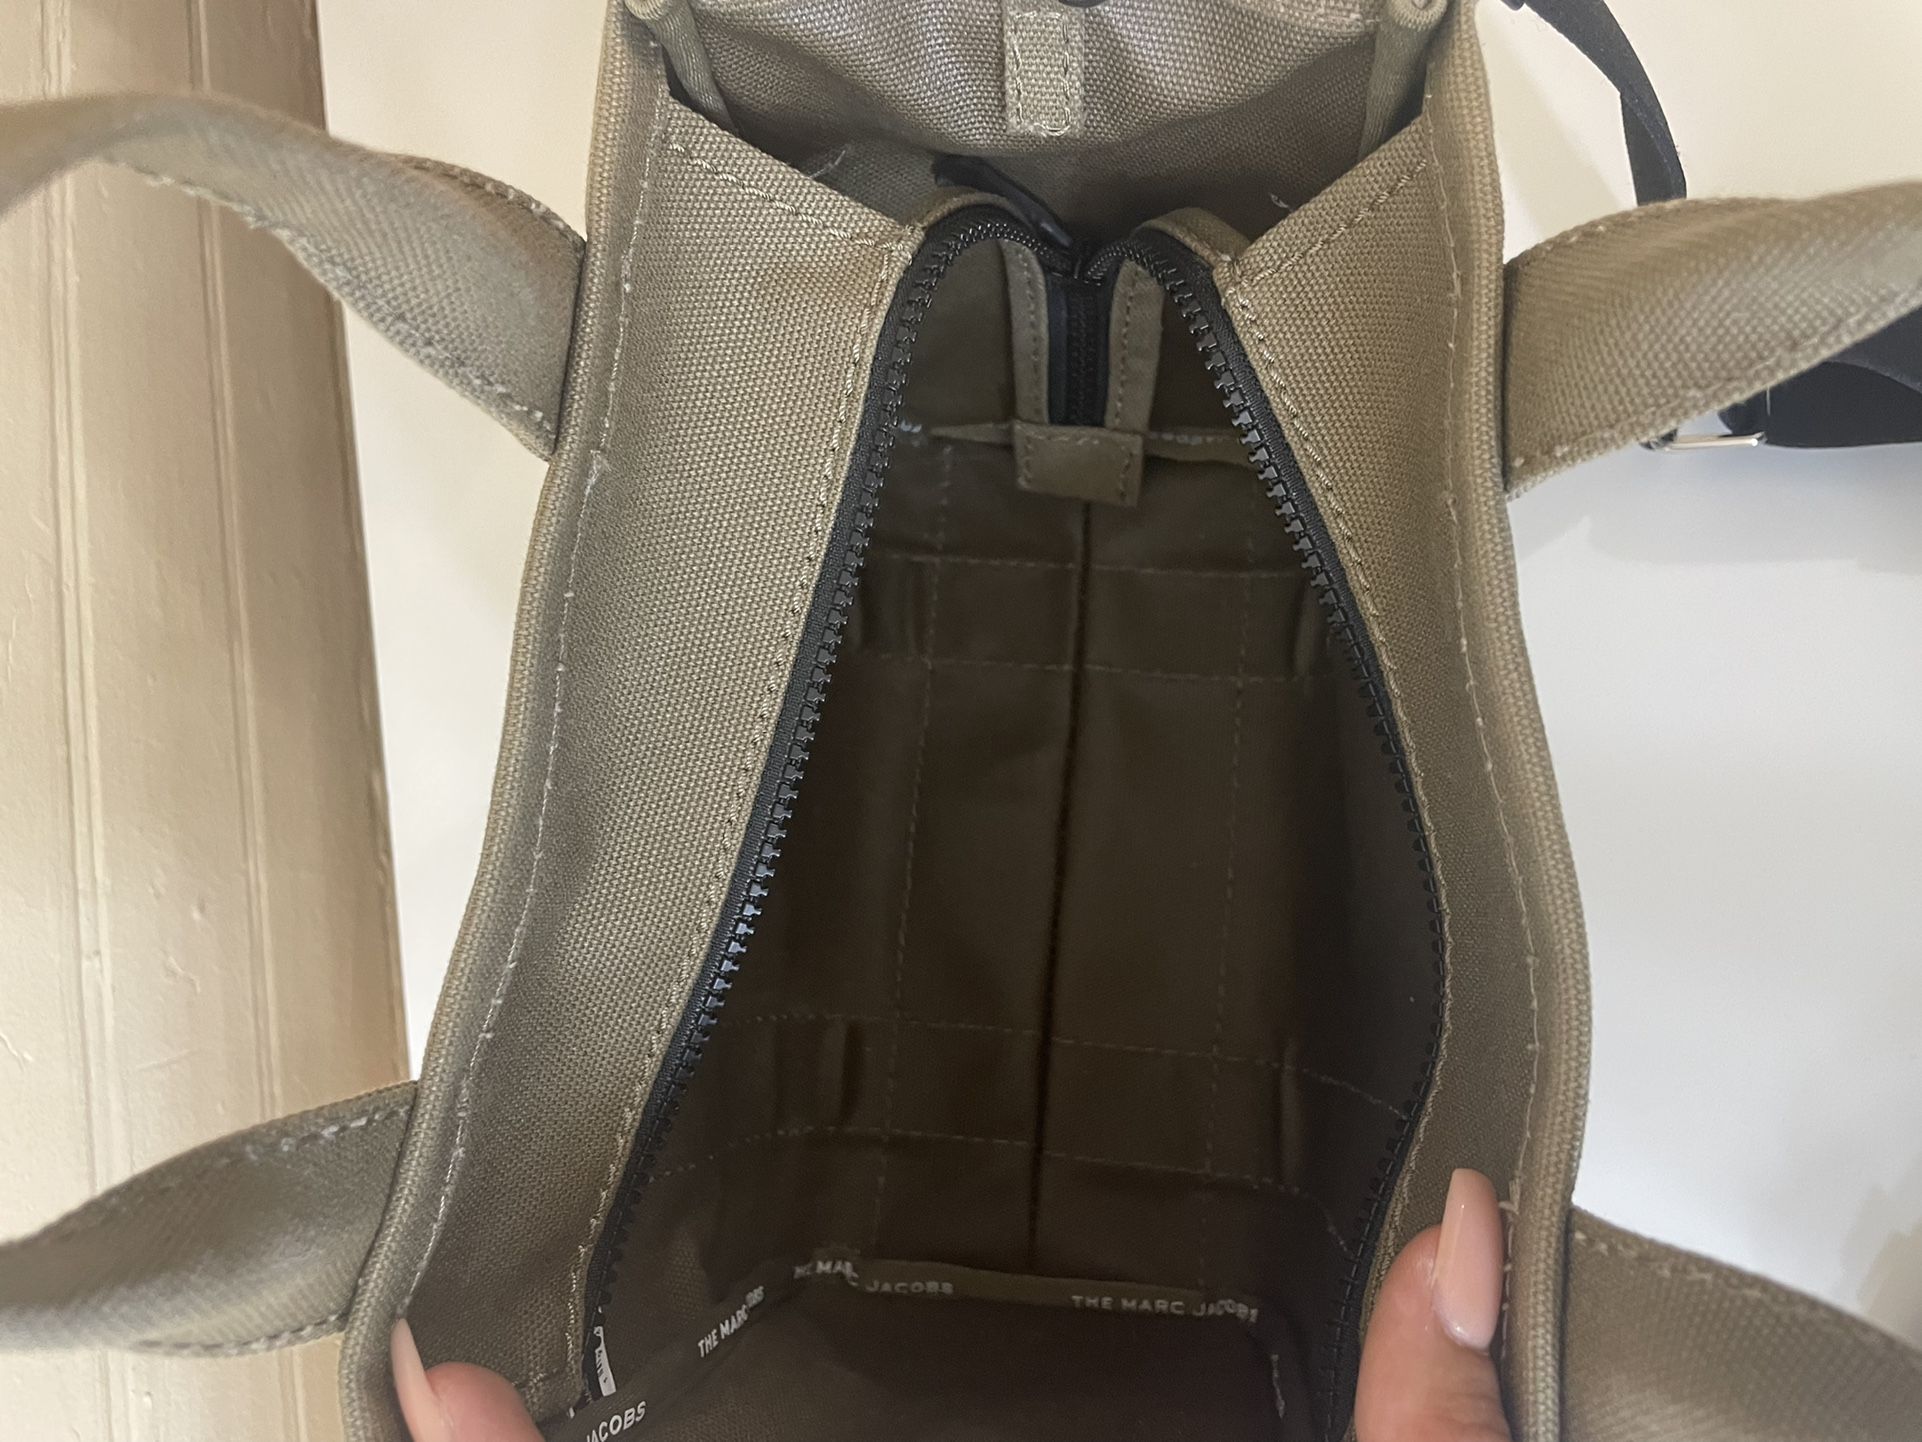 Marc Jacobs Tote New With Tags for Sale in San Diego, CA - OfferUp